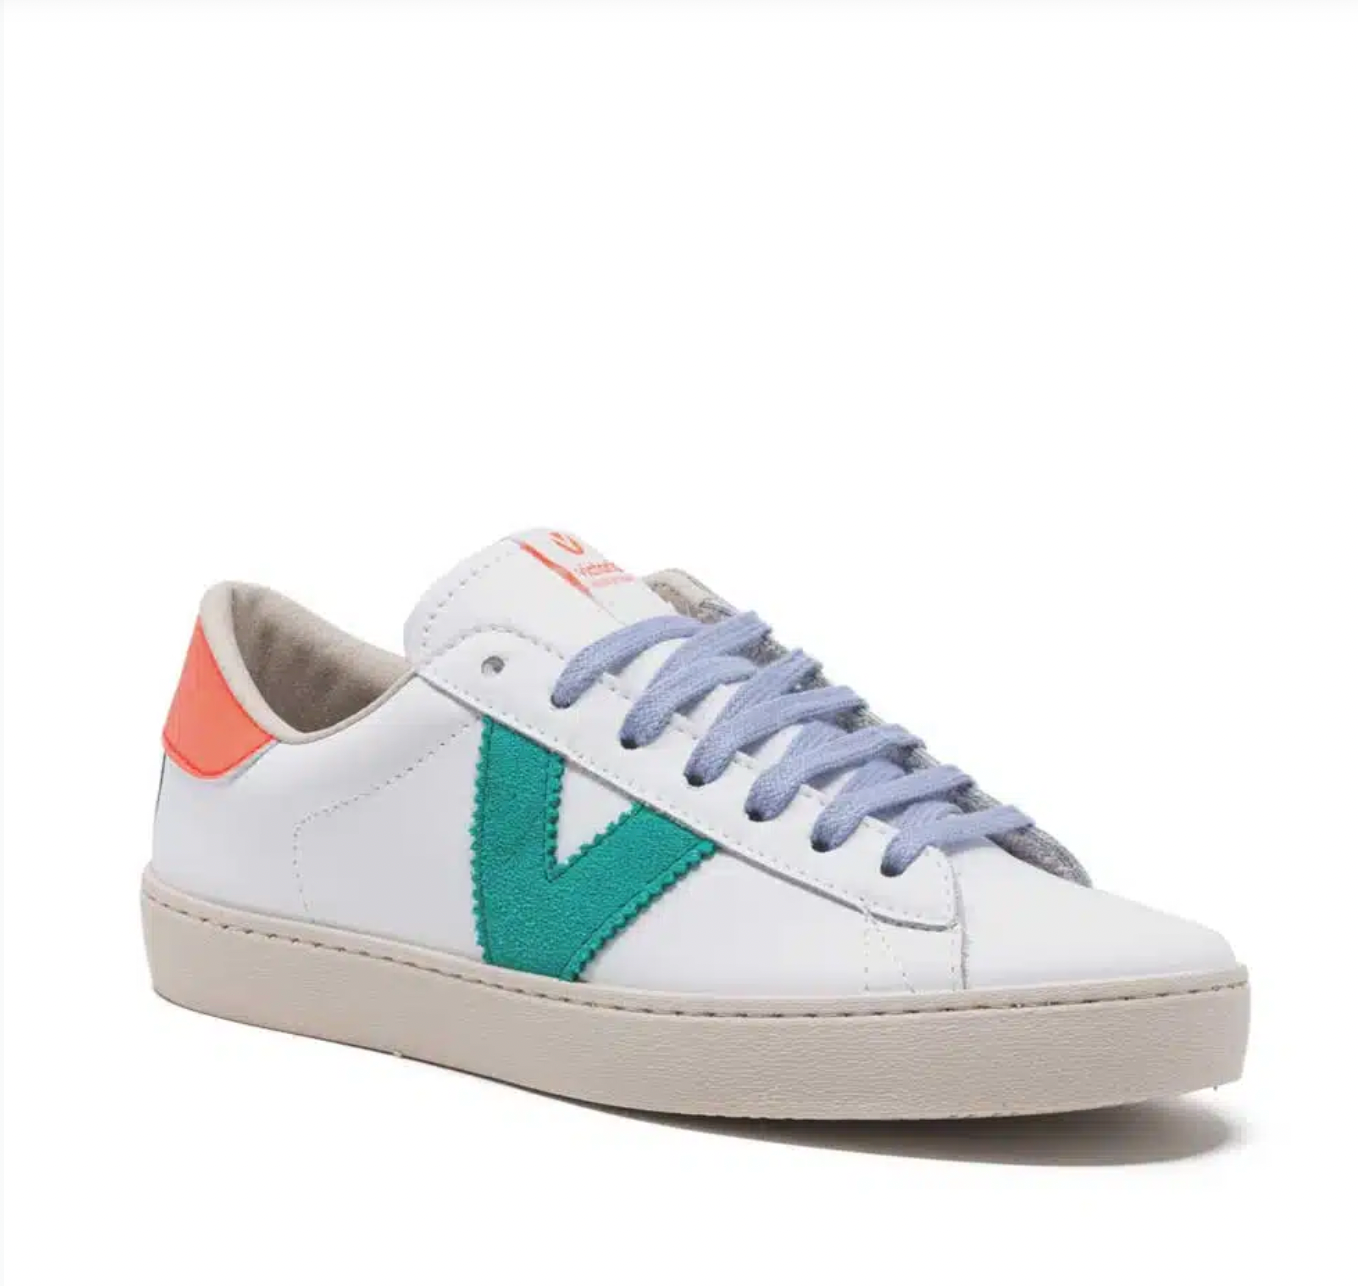 Victoria Berlin Trainers Leather & Neon Coral